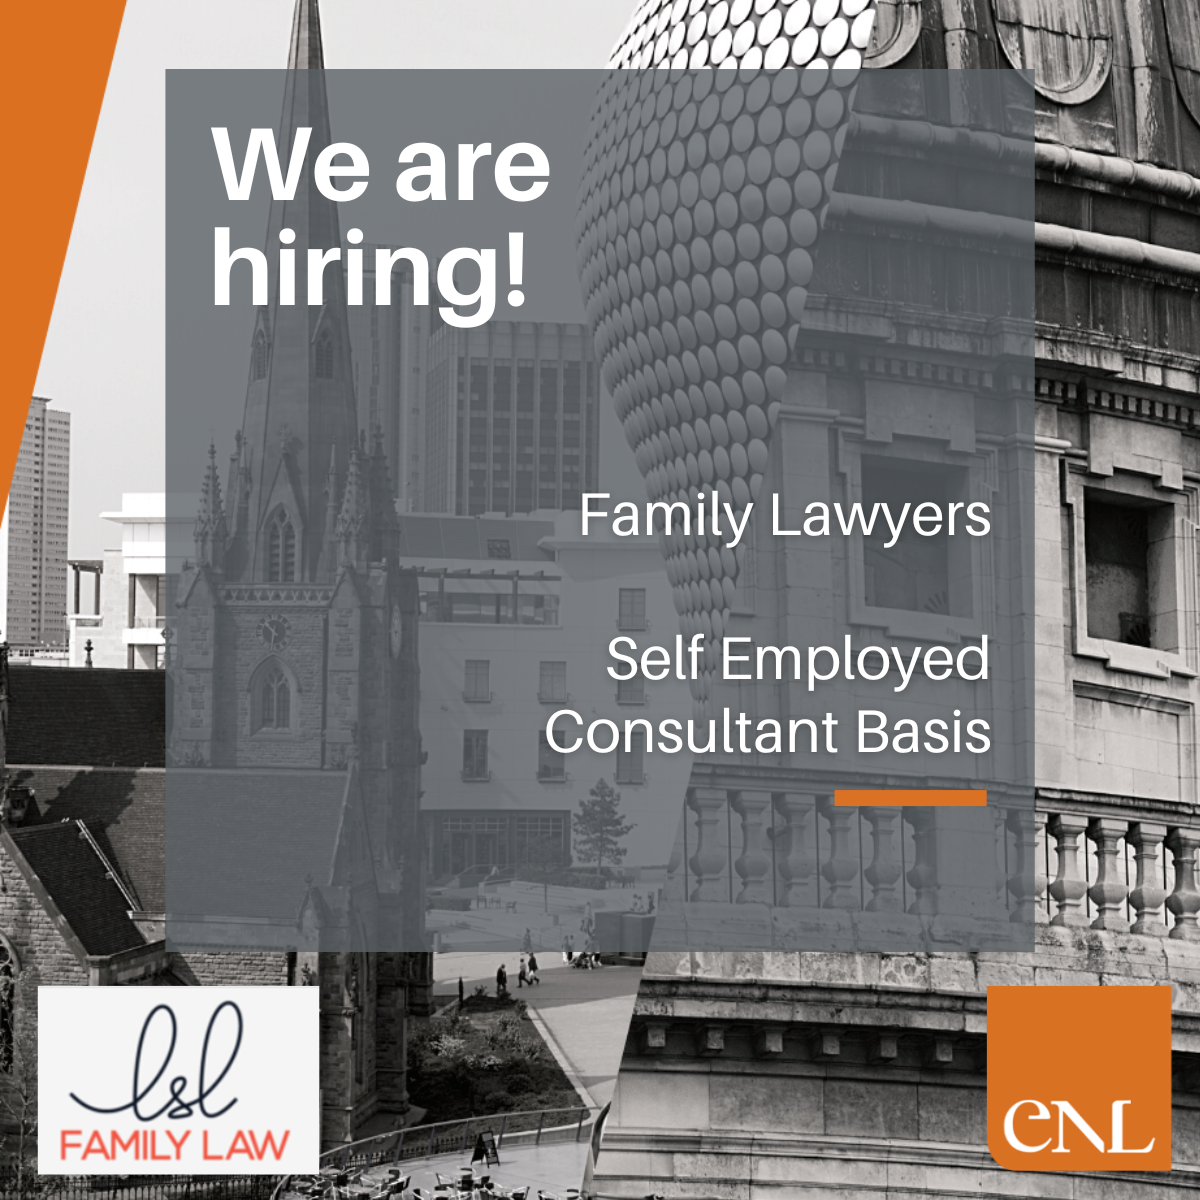 Have you considered a career working as a Legal Consultant?